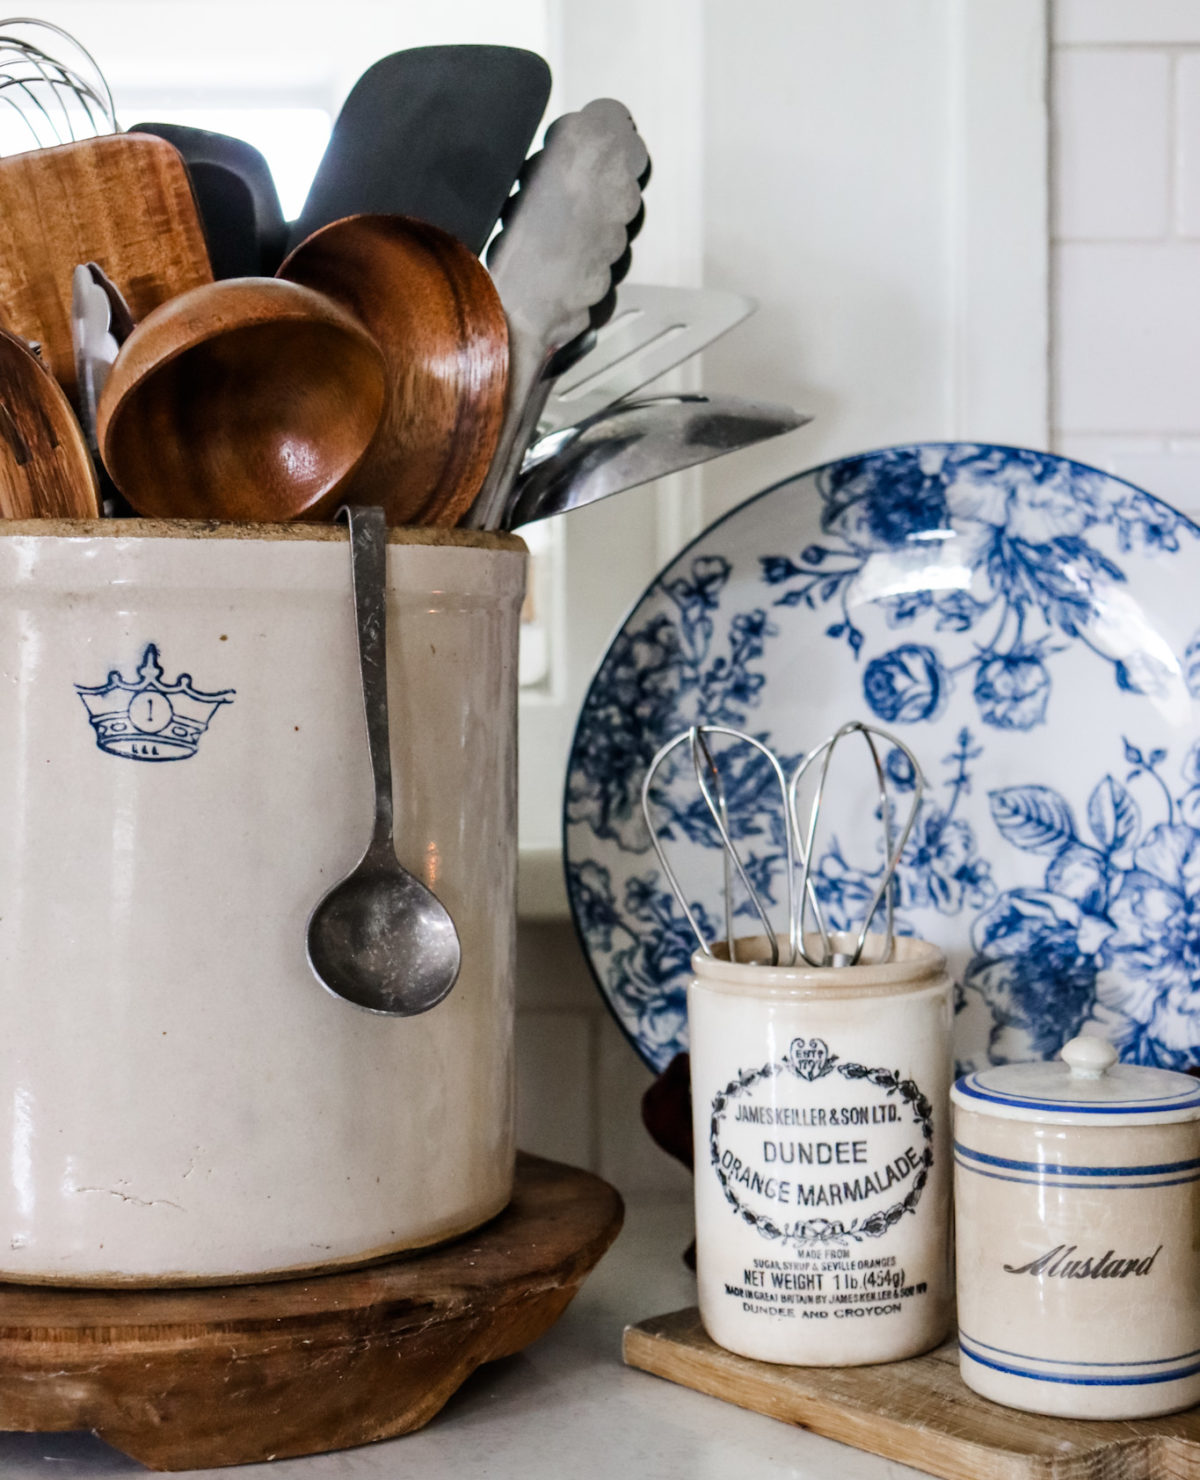 Vintage crock and marmalade jar are stylish organization options in a kitchen.